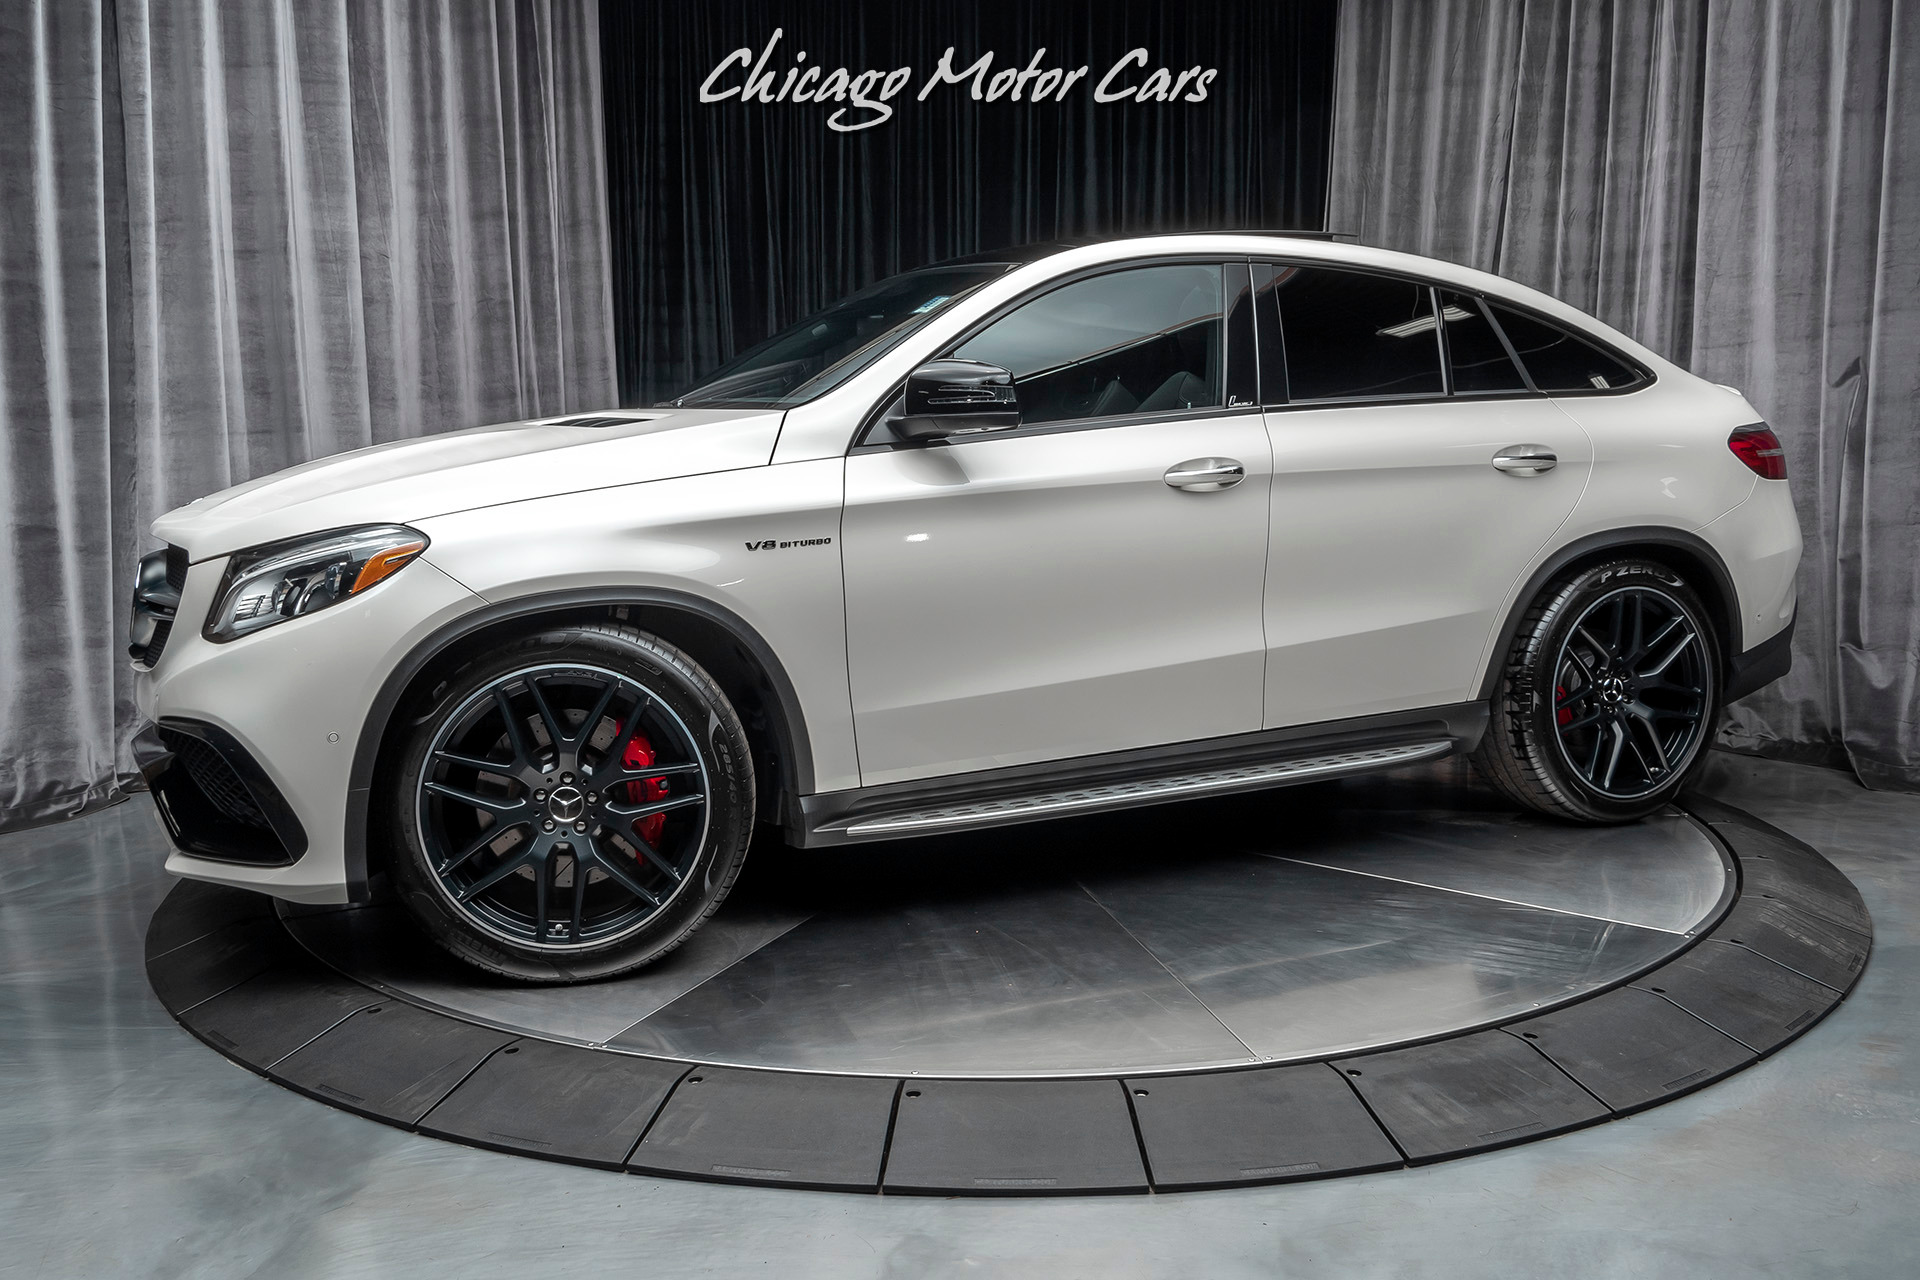 Used 18 Mercedes Benz Gle63 Amg S 4matic Suv Msrp 123 040 Loaded Massage Seats For Sale Special Pricing Chicago Motor Cars Stock 167